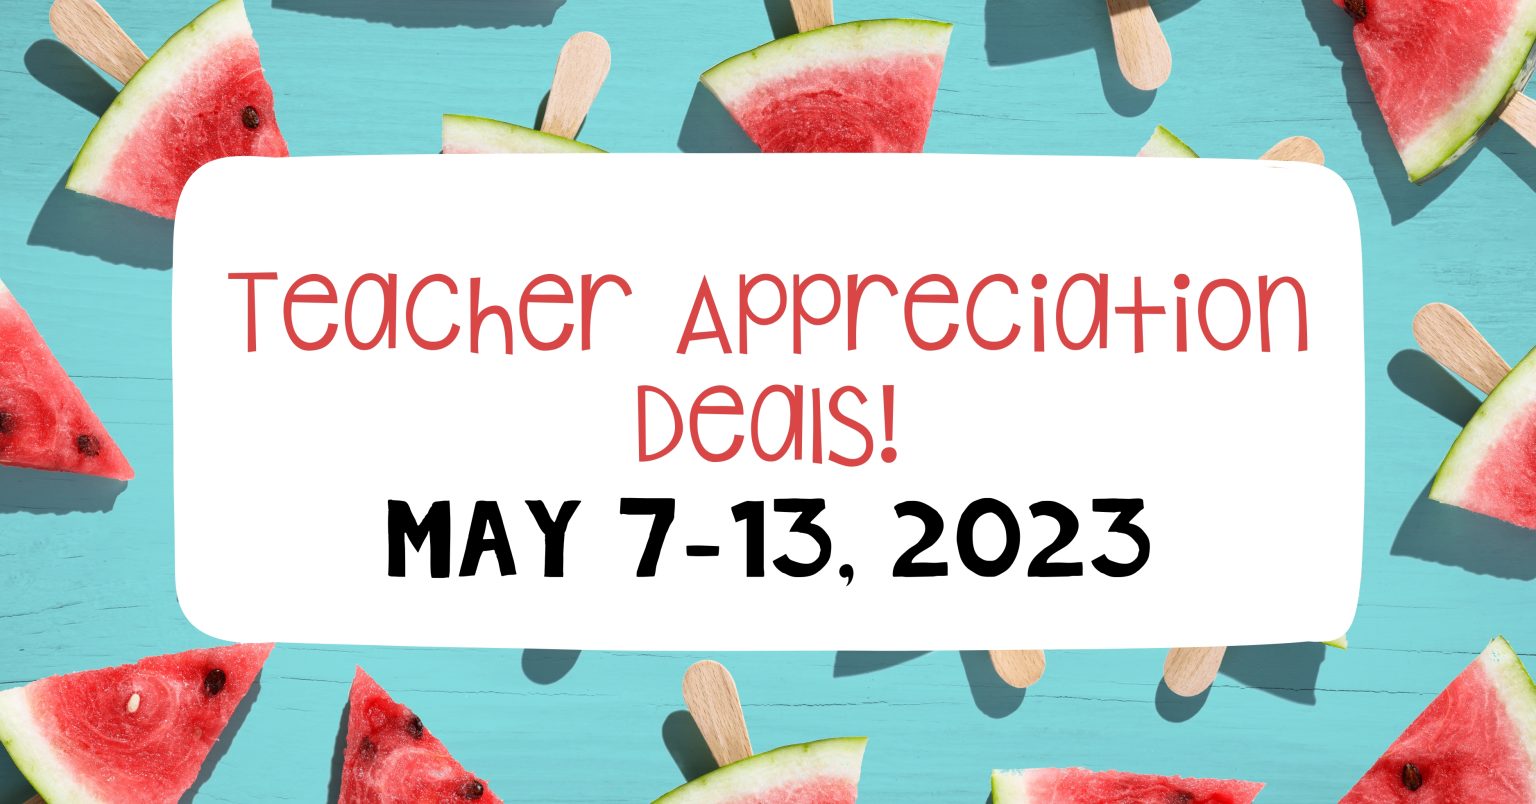 Teacher Appreciation Deals You Do NOT Want to Miss This Year